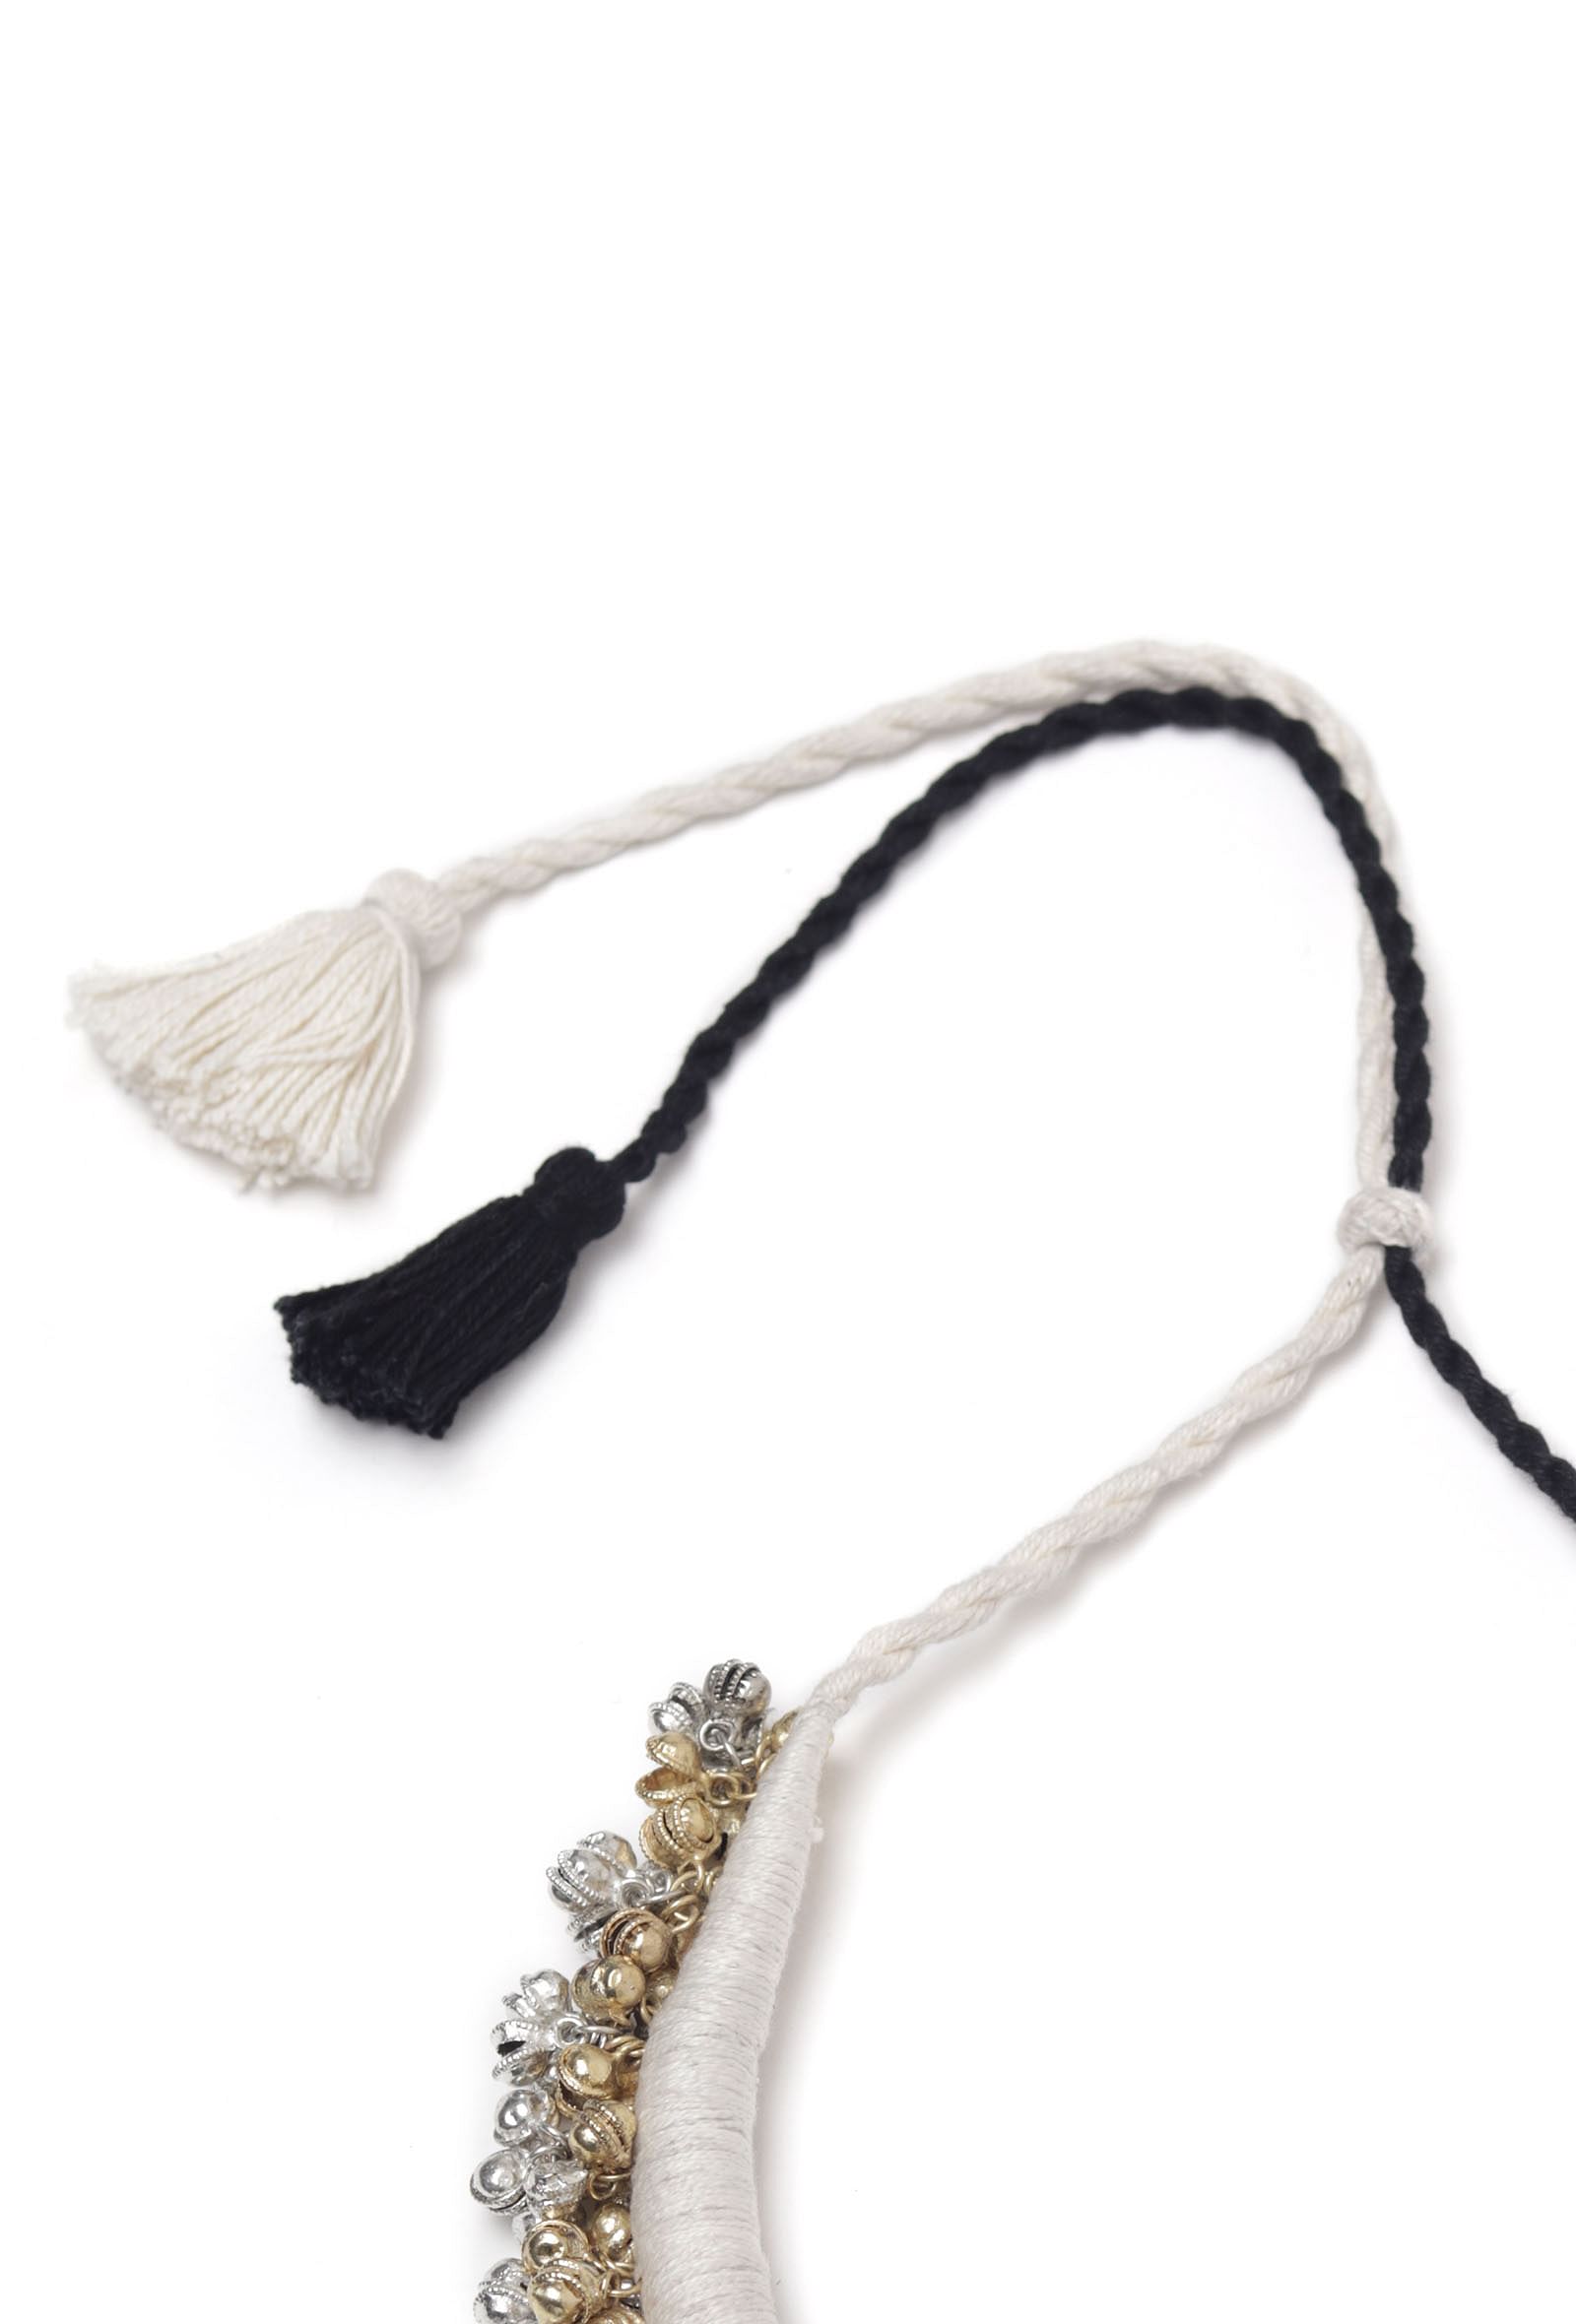 Astira Duo White and Black Tribal Ghungroo  Necklace